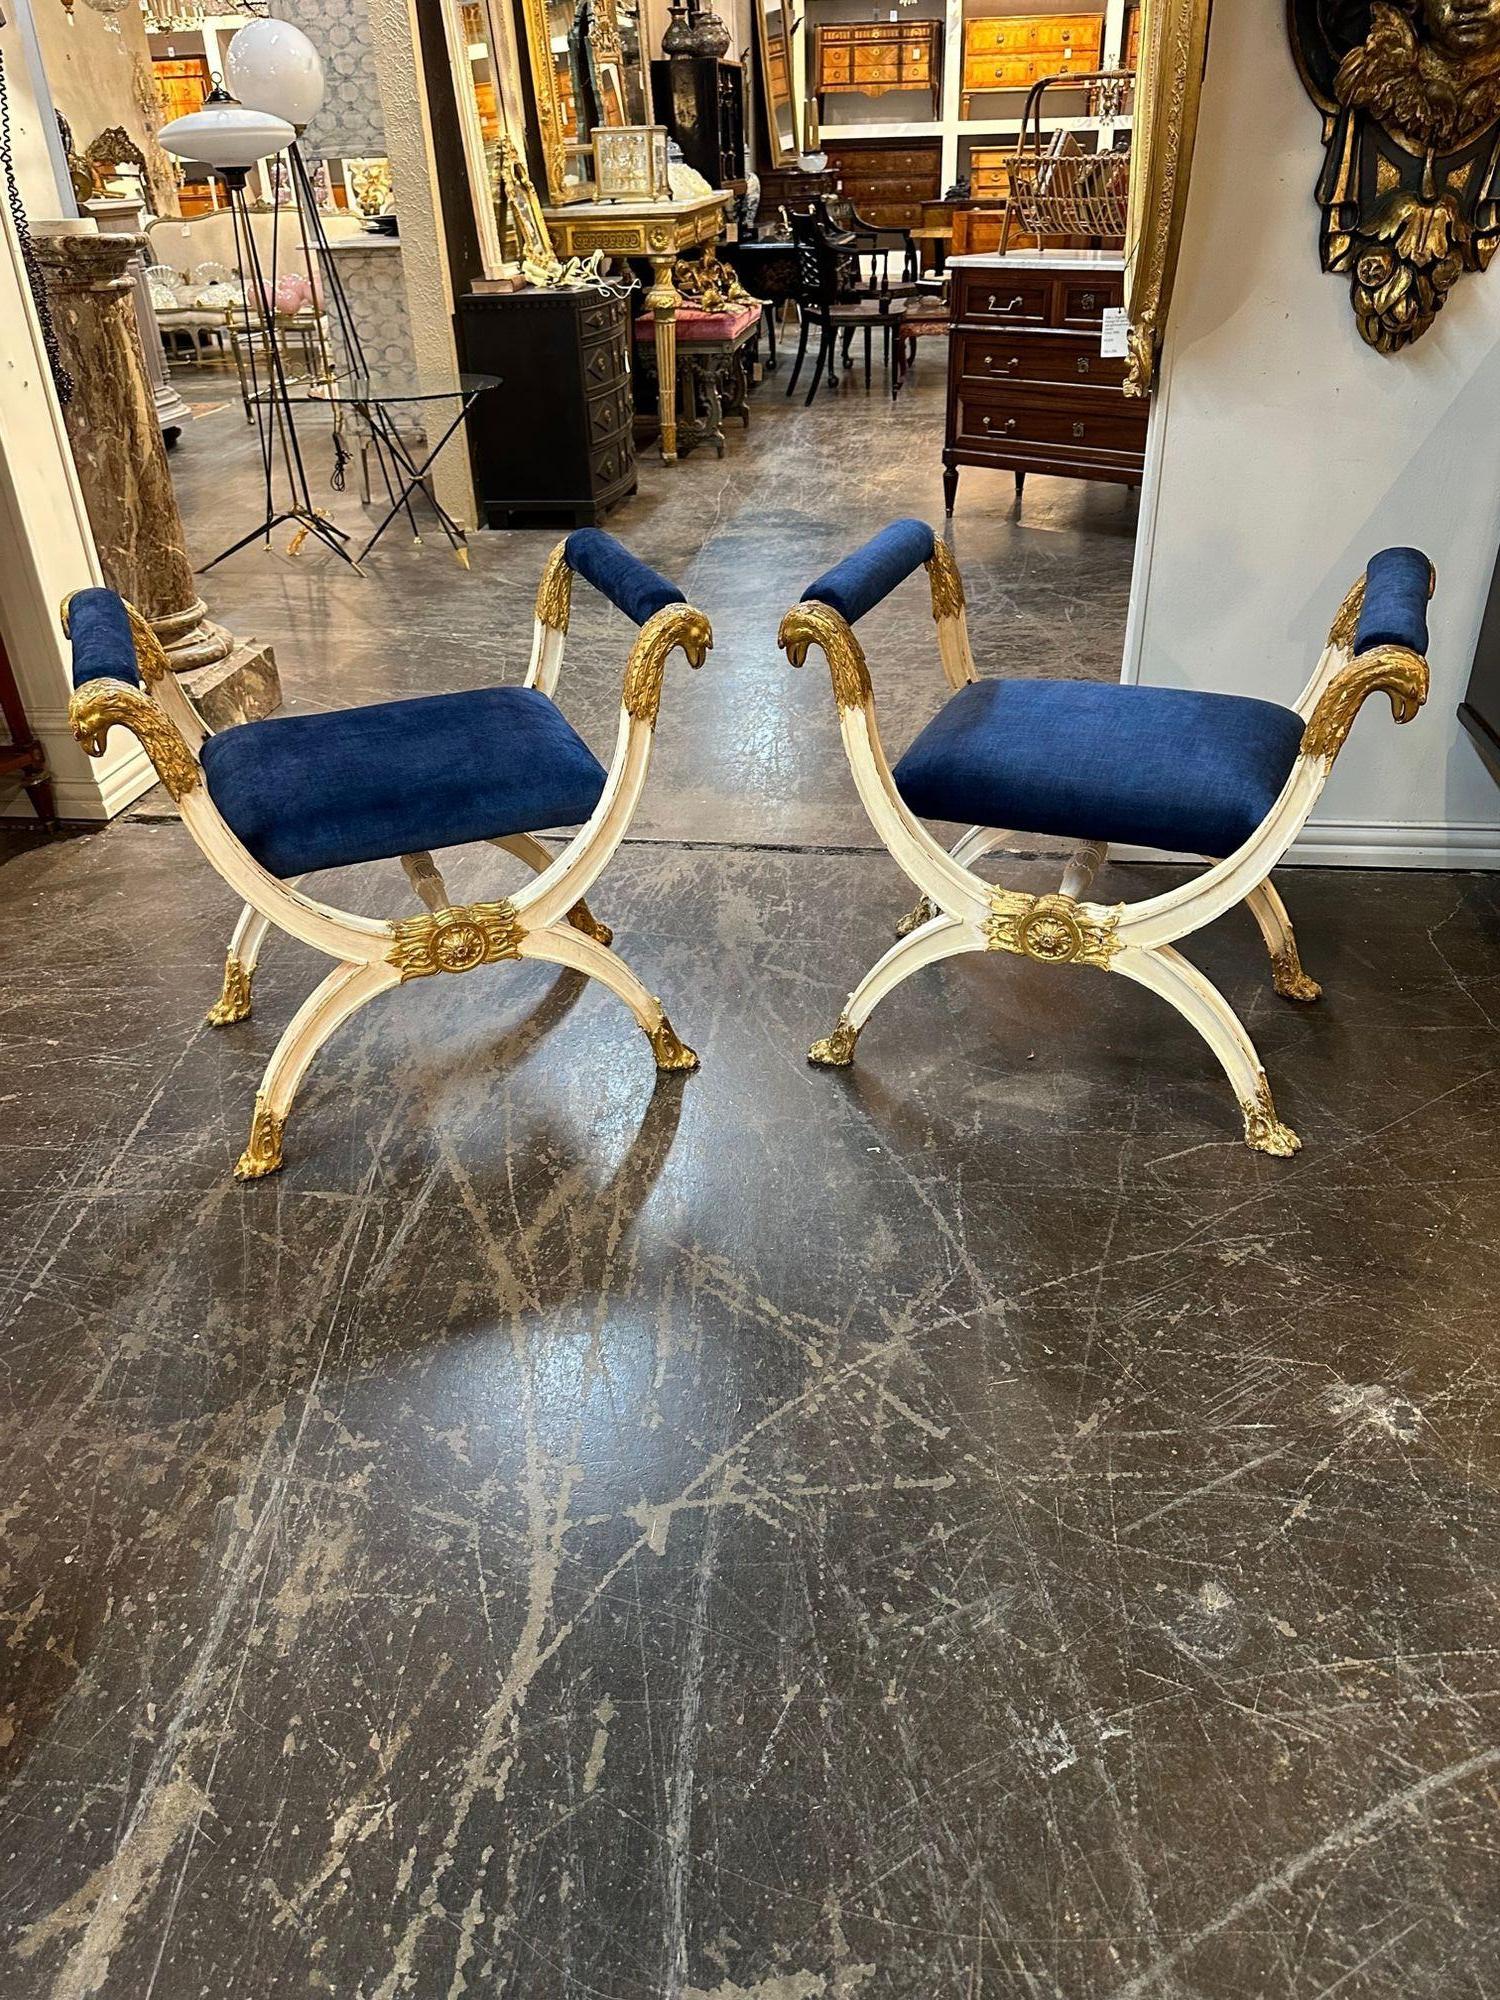 Handsome pair of 19th century Italian Empire style carved and parcel gilt benches. Nice carvings and beautiful royal blue upholstery. Very stylish!